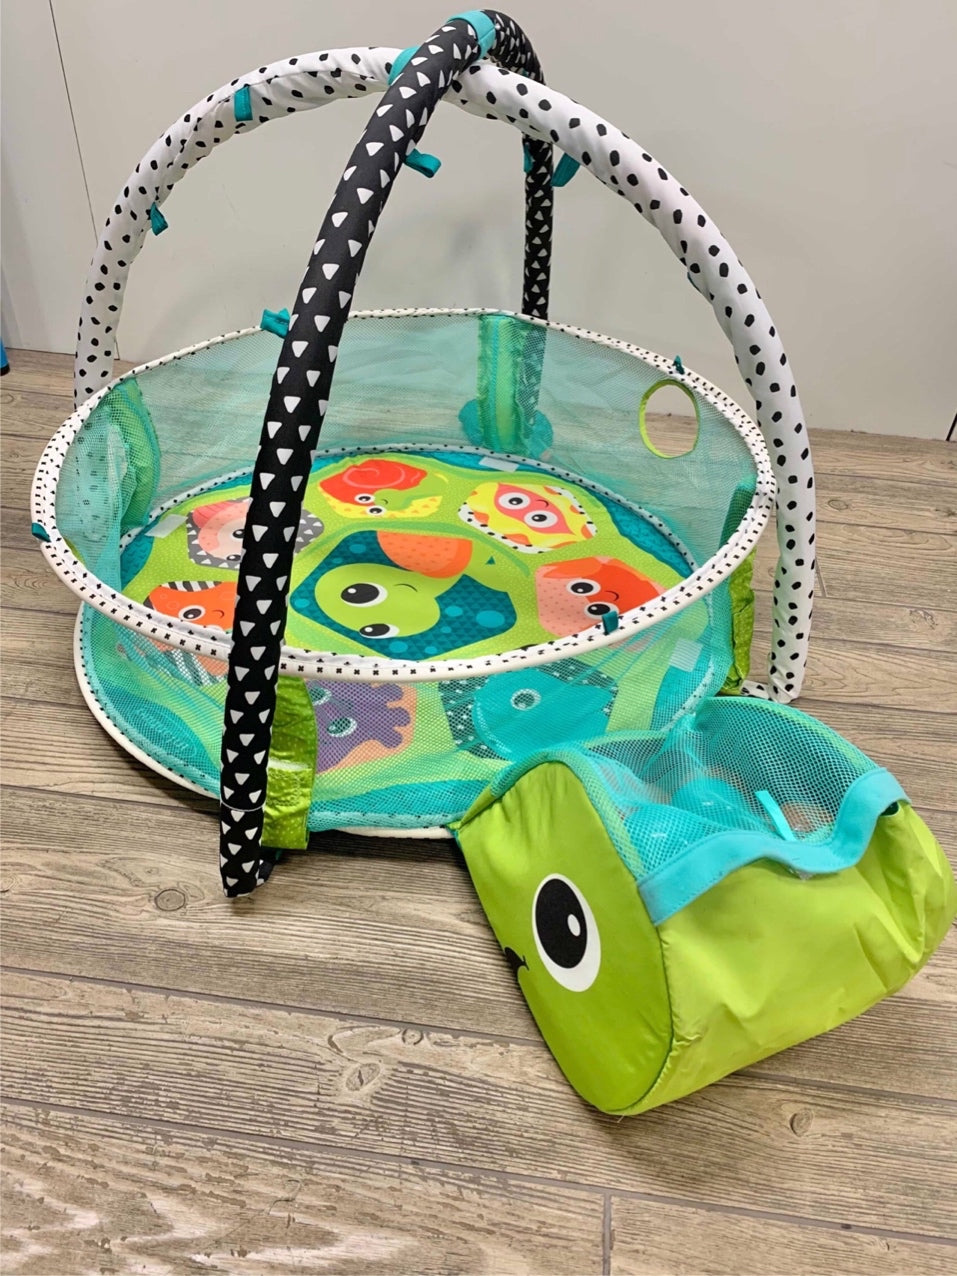 Grow-With-Me Activity Gym & Ball Pit™ – Infantino